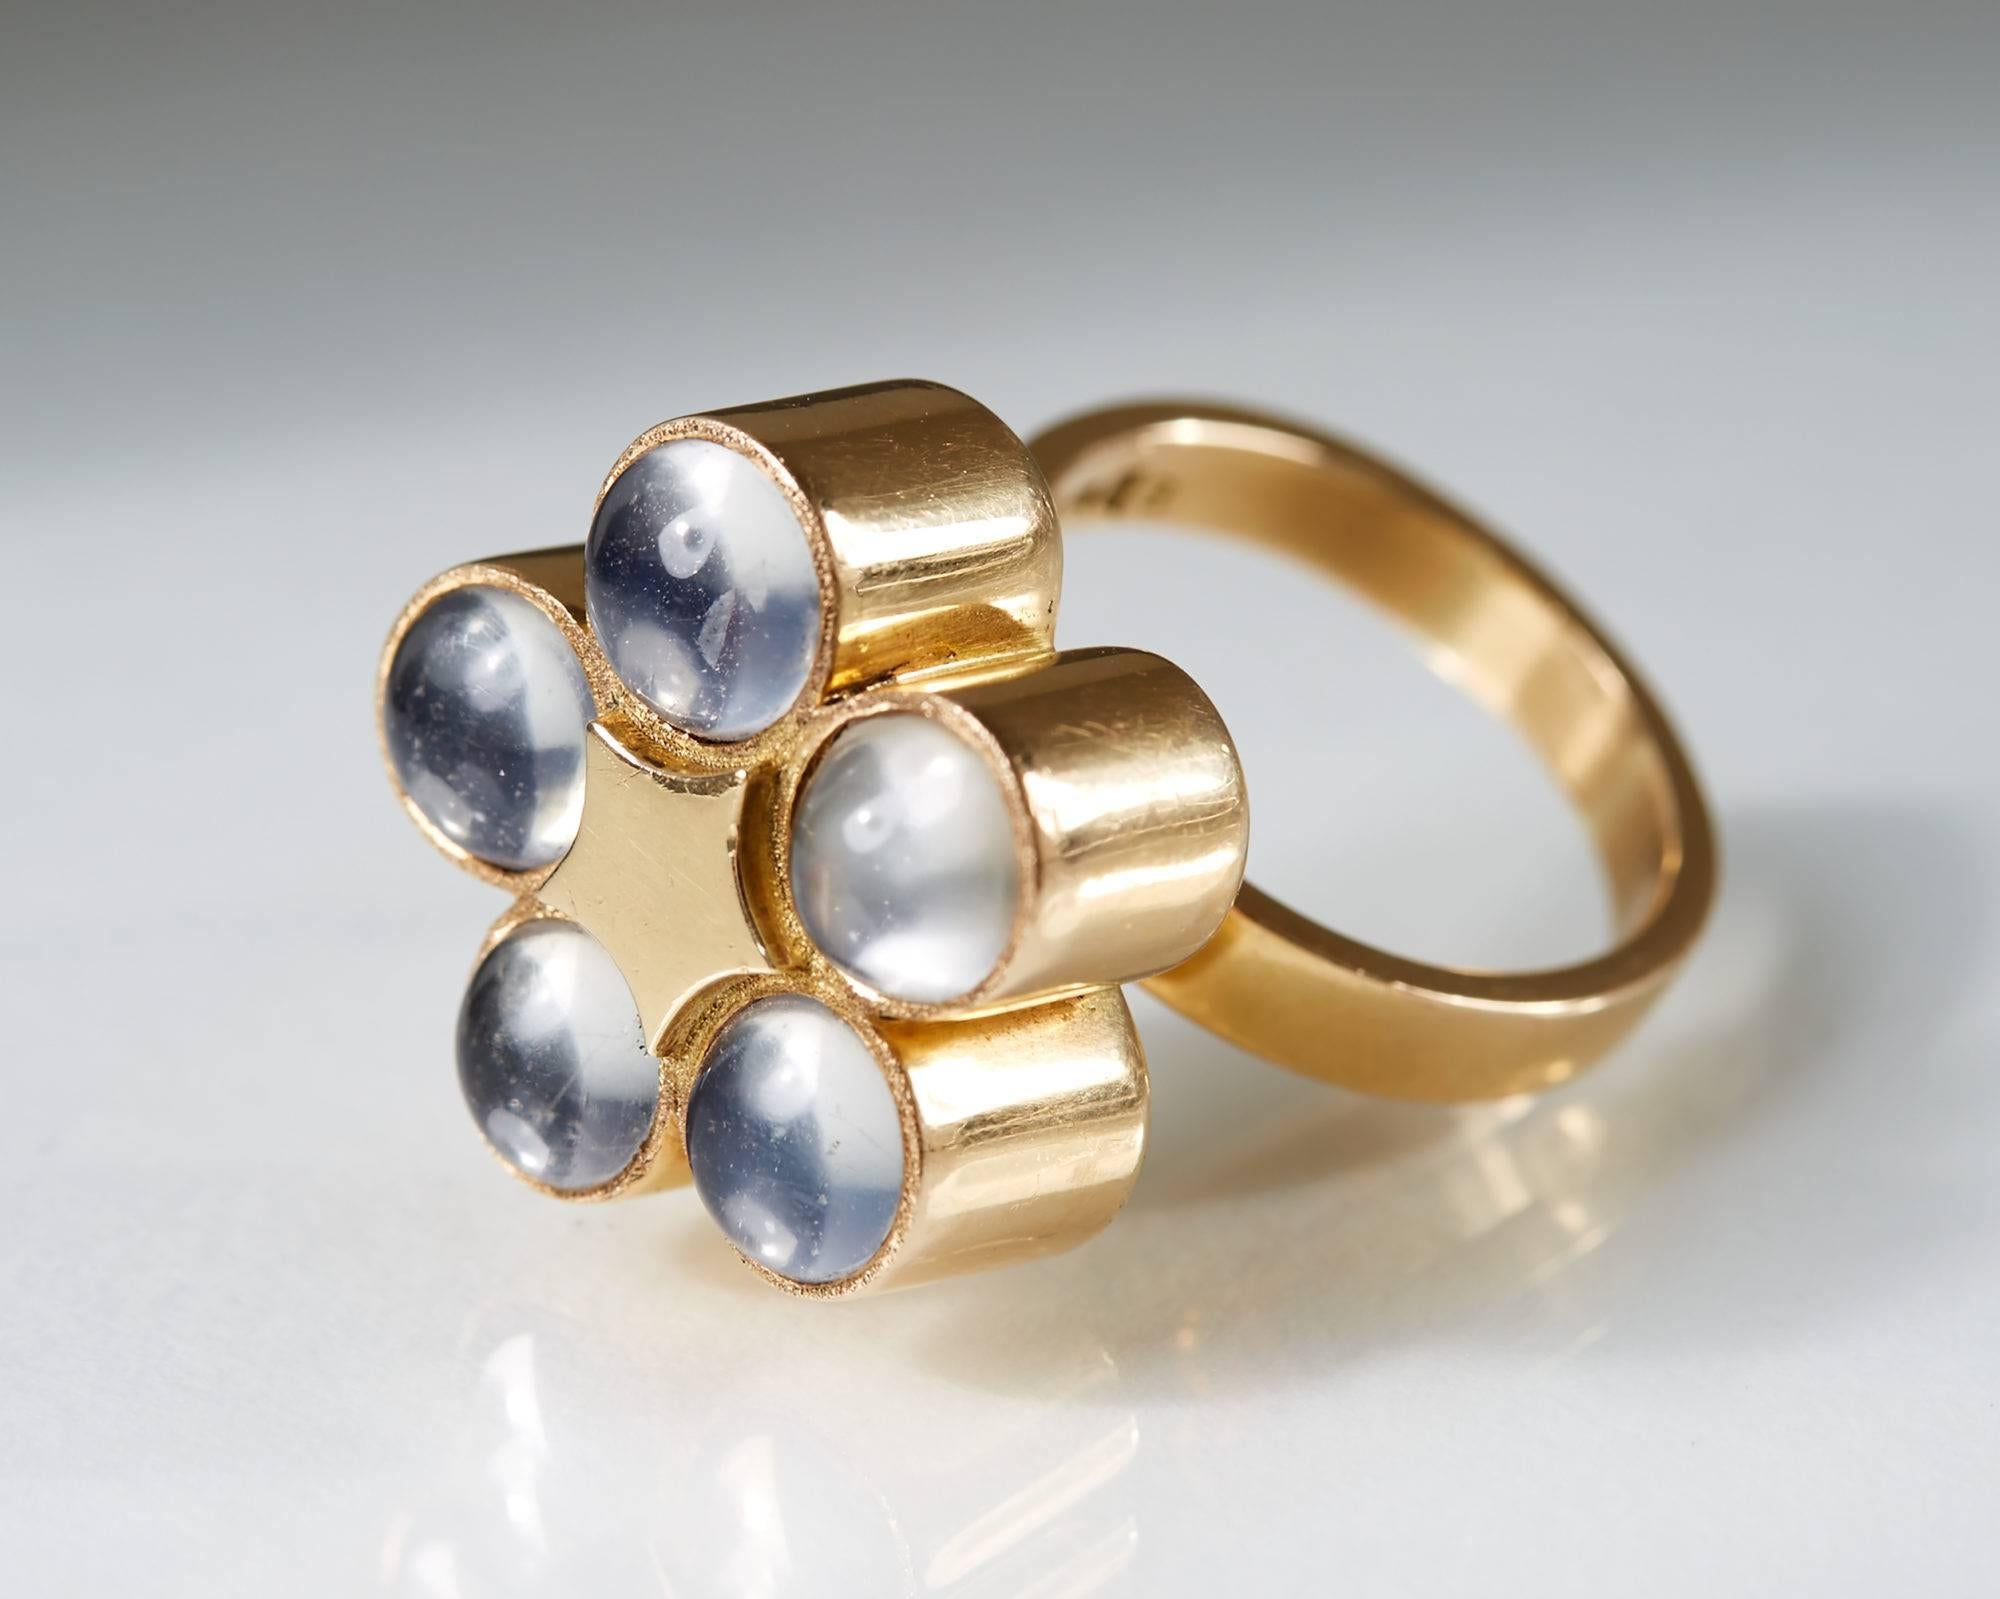 Ring designed by Sigurd Persson, Sweden, 1974.
18-carat gold and moonstones.
Size: 19 mm/
Weight: 20 gr.
 